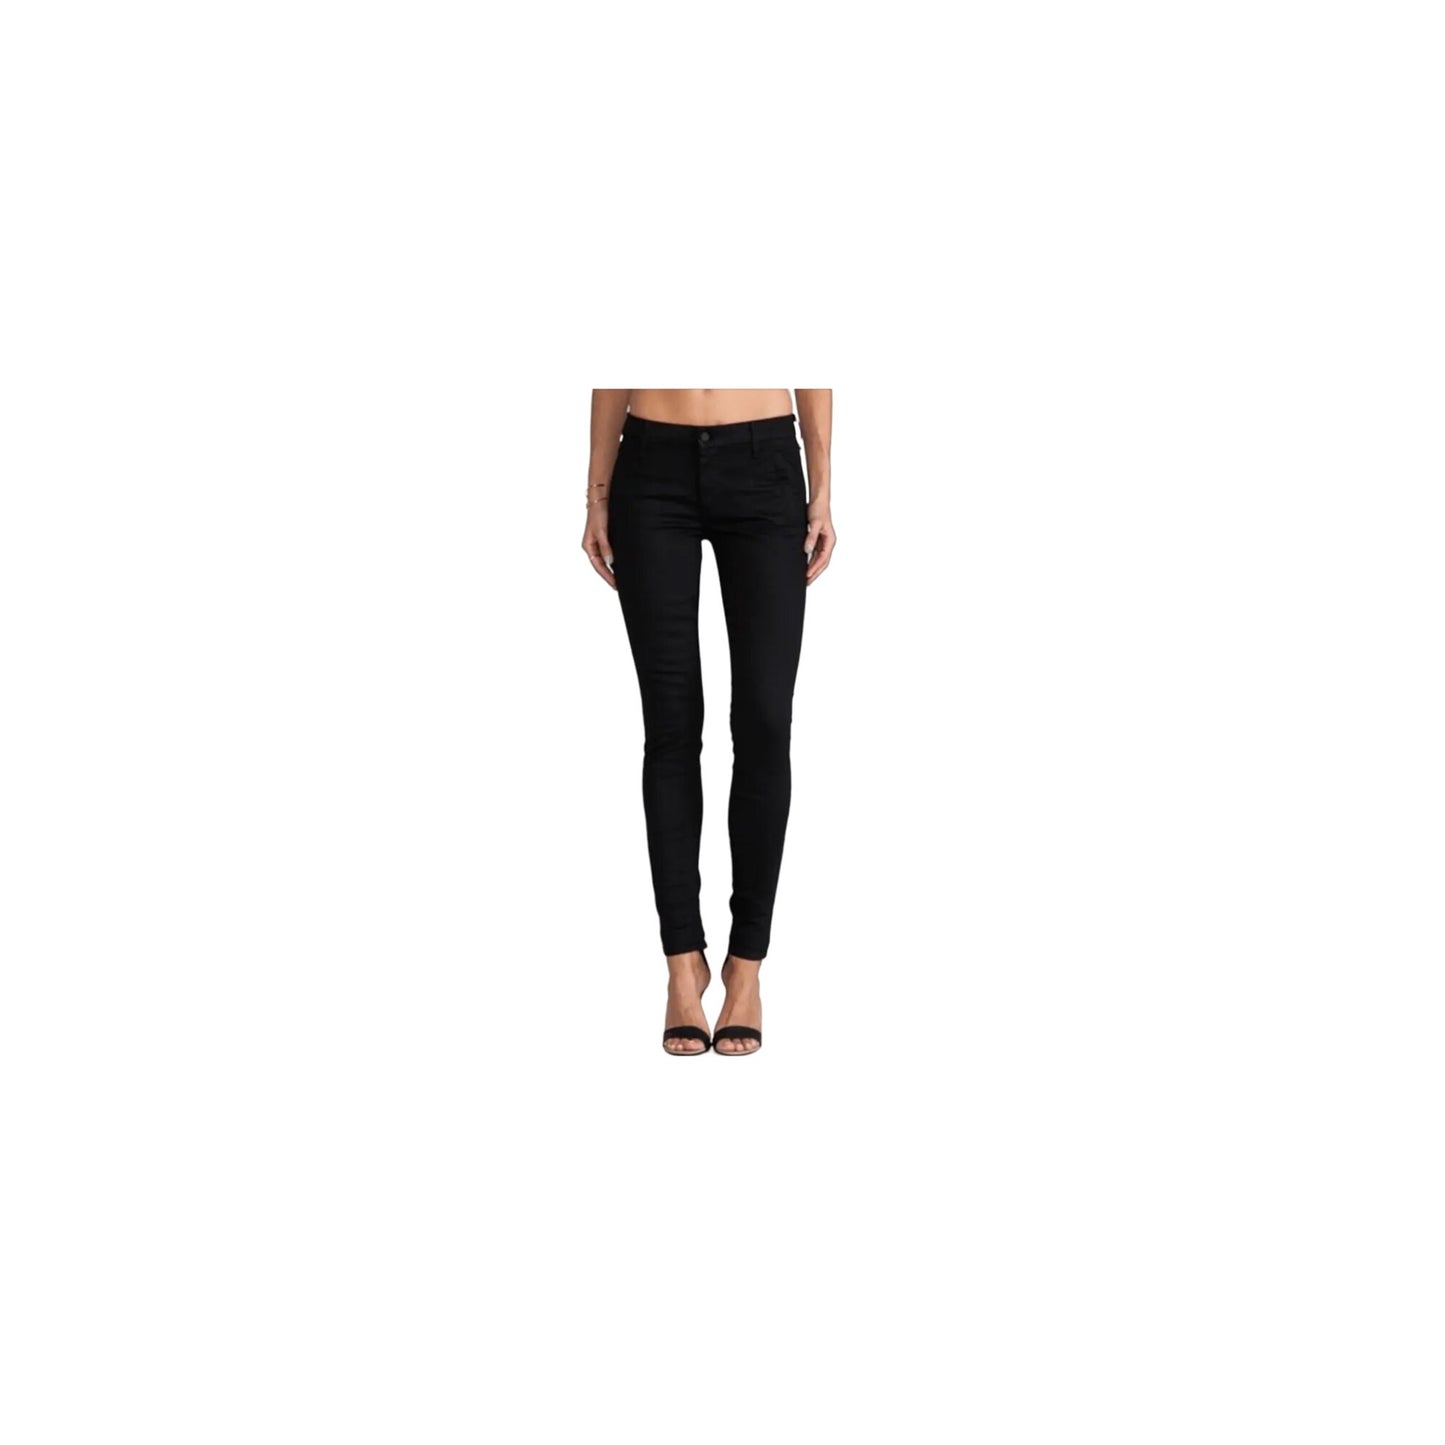 Freja Mother Welt Zip Muse Black Skinny Jeans with Ankle Zip